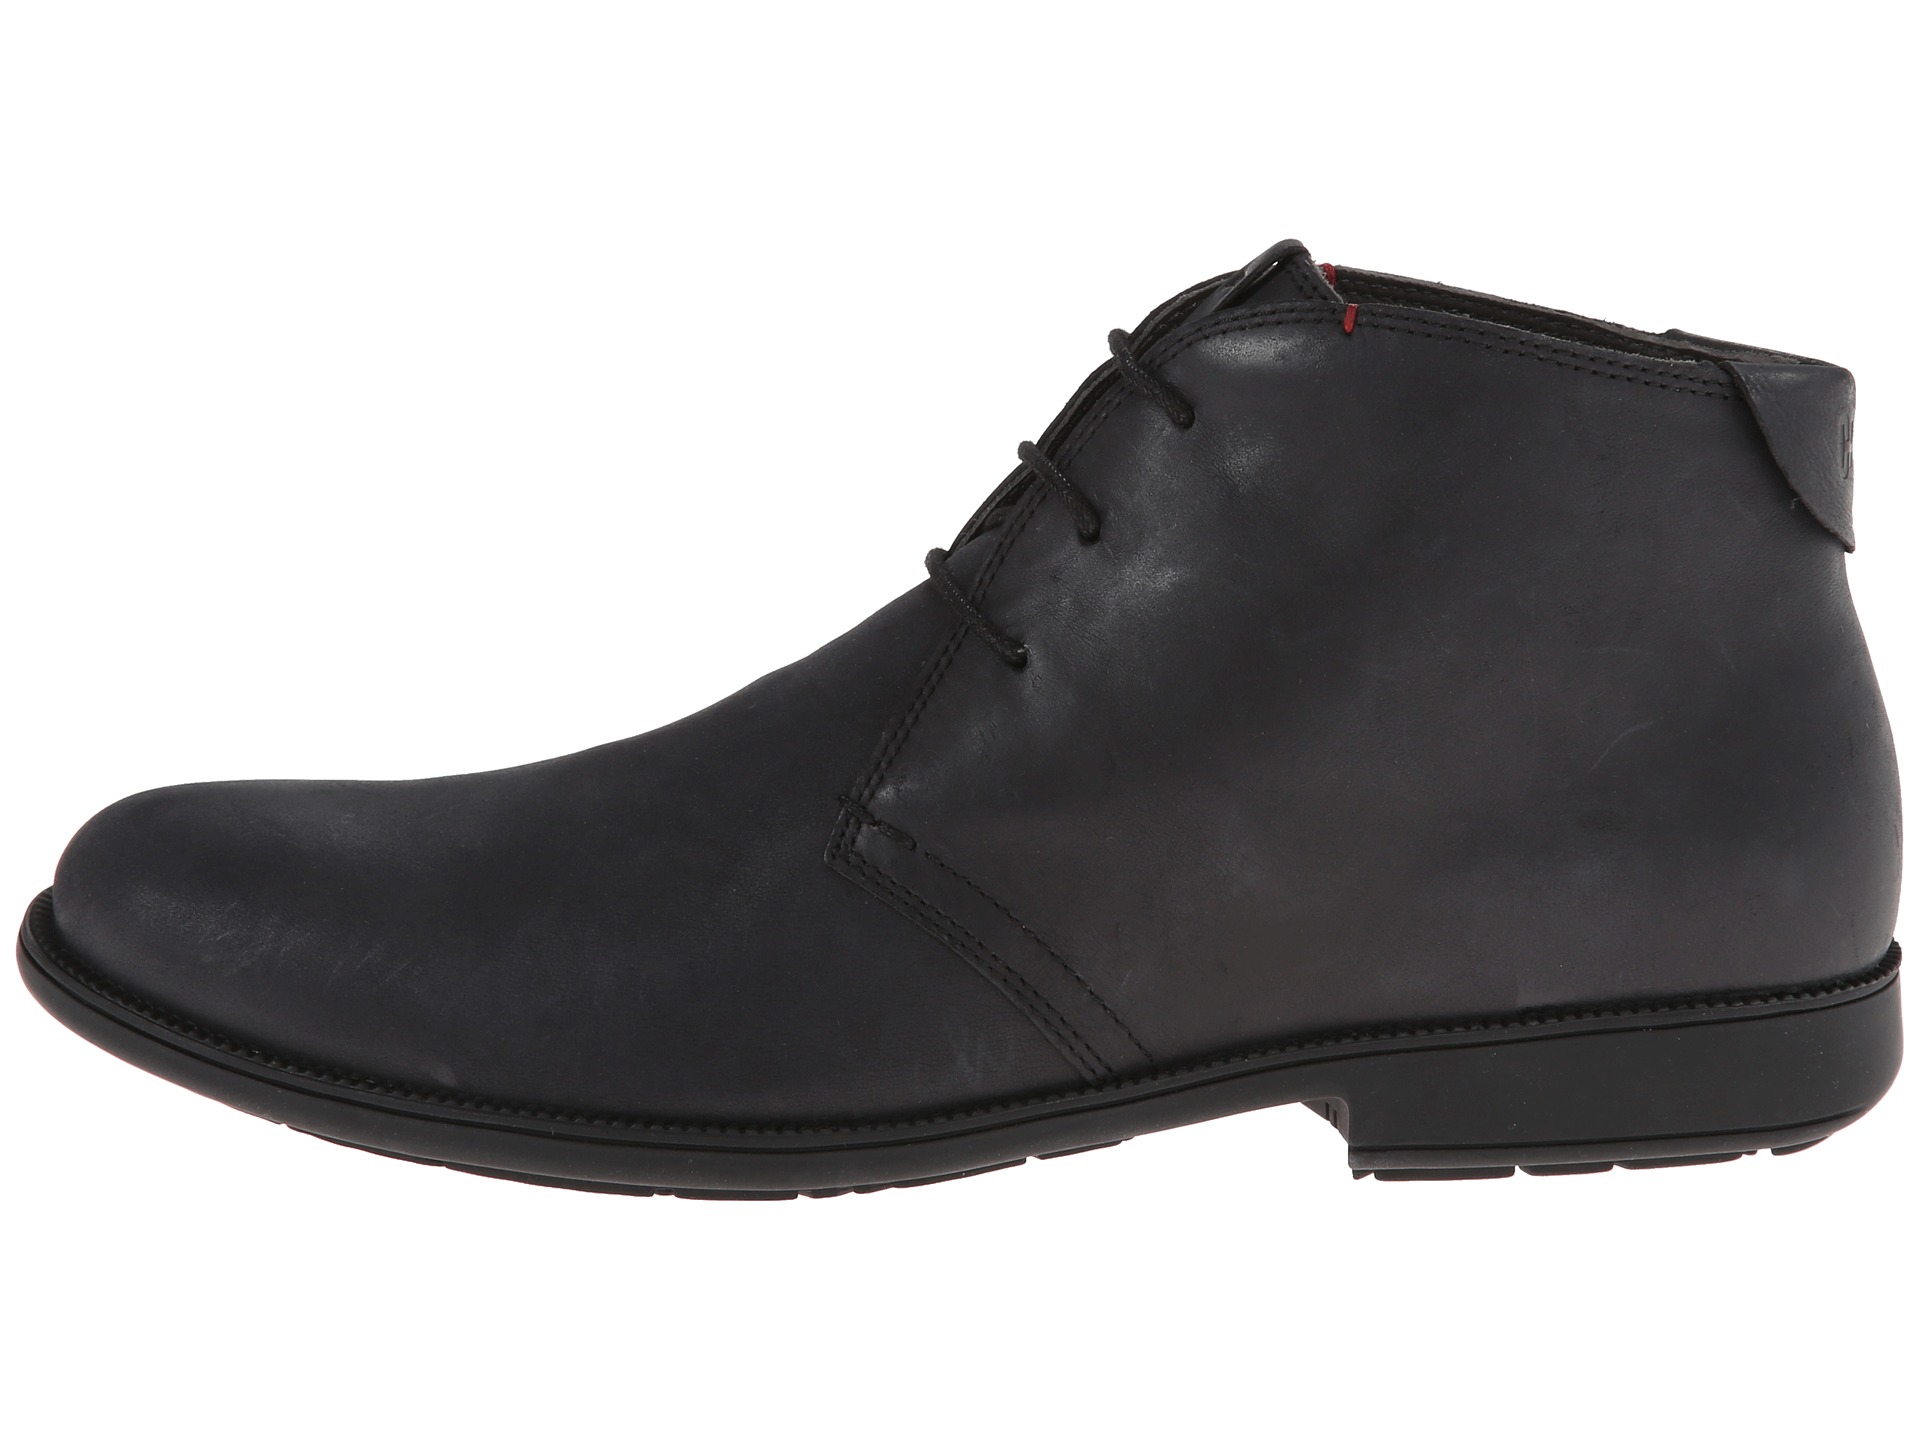 Camper 1913 Ankle Boot 36587, Shoes | Shipped Free at Zappos